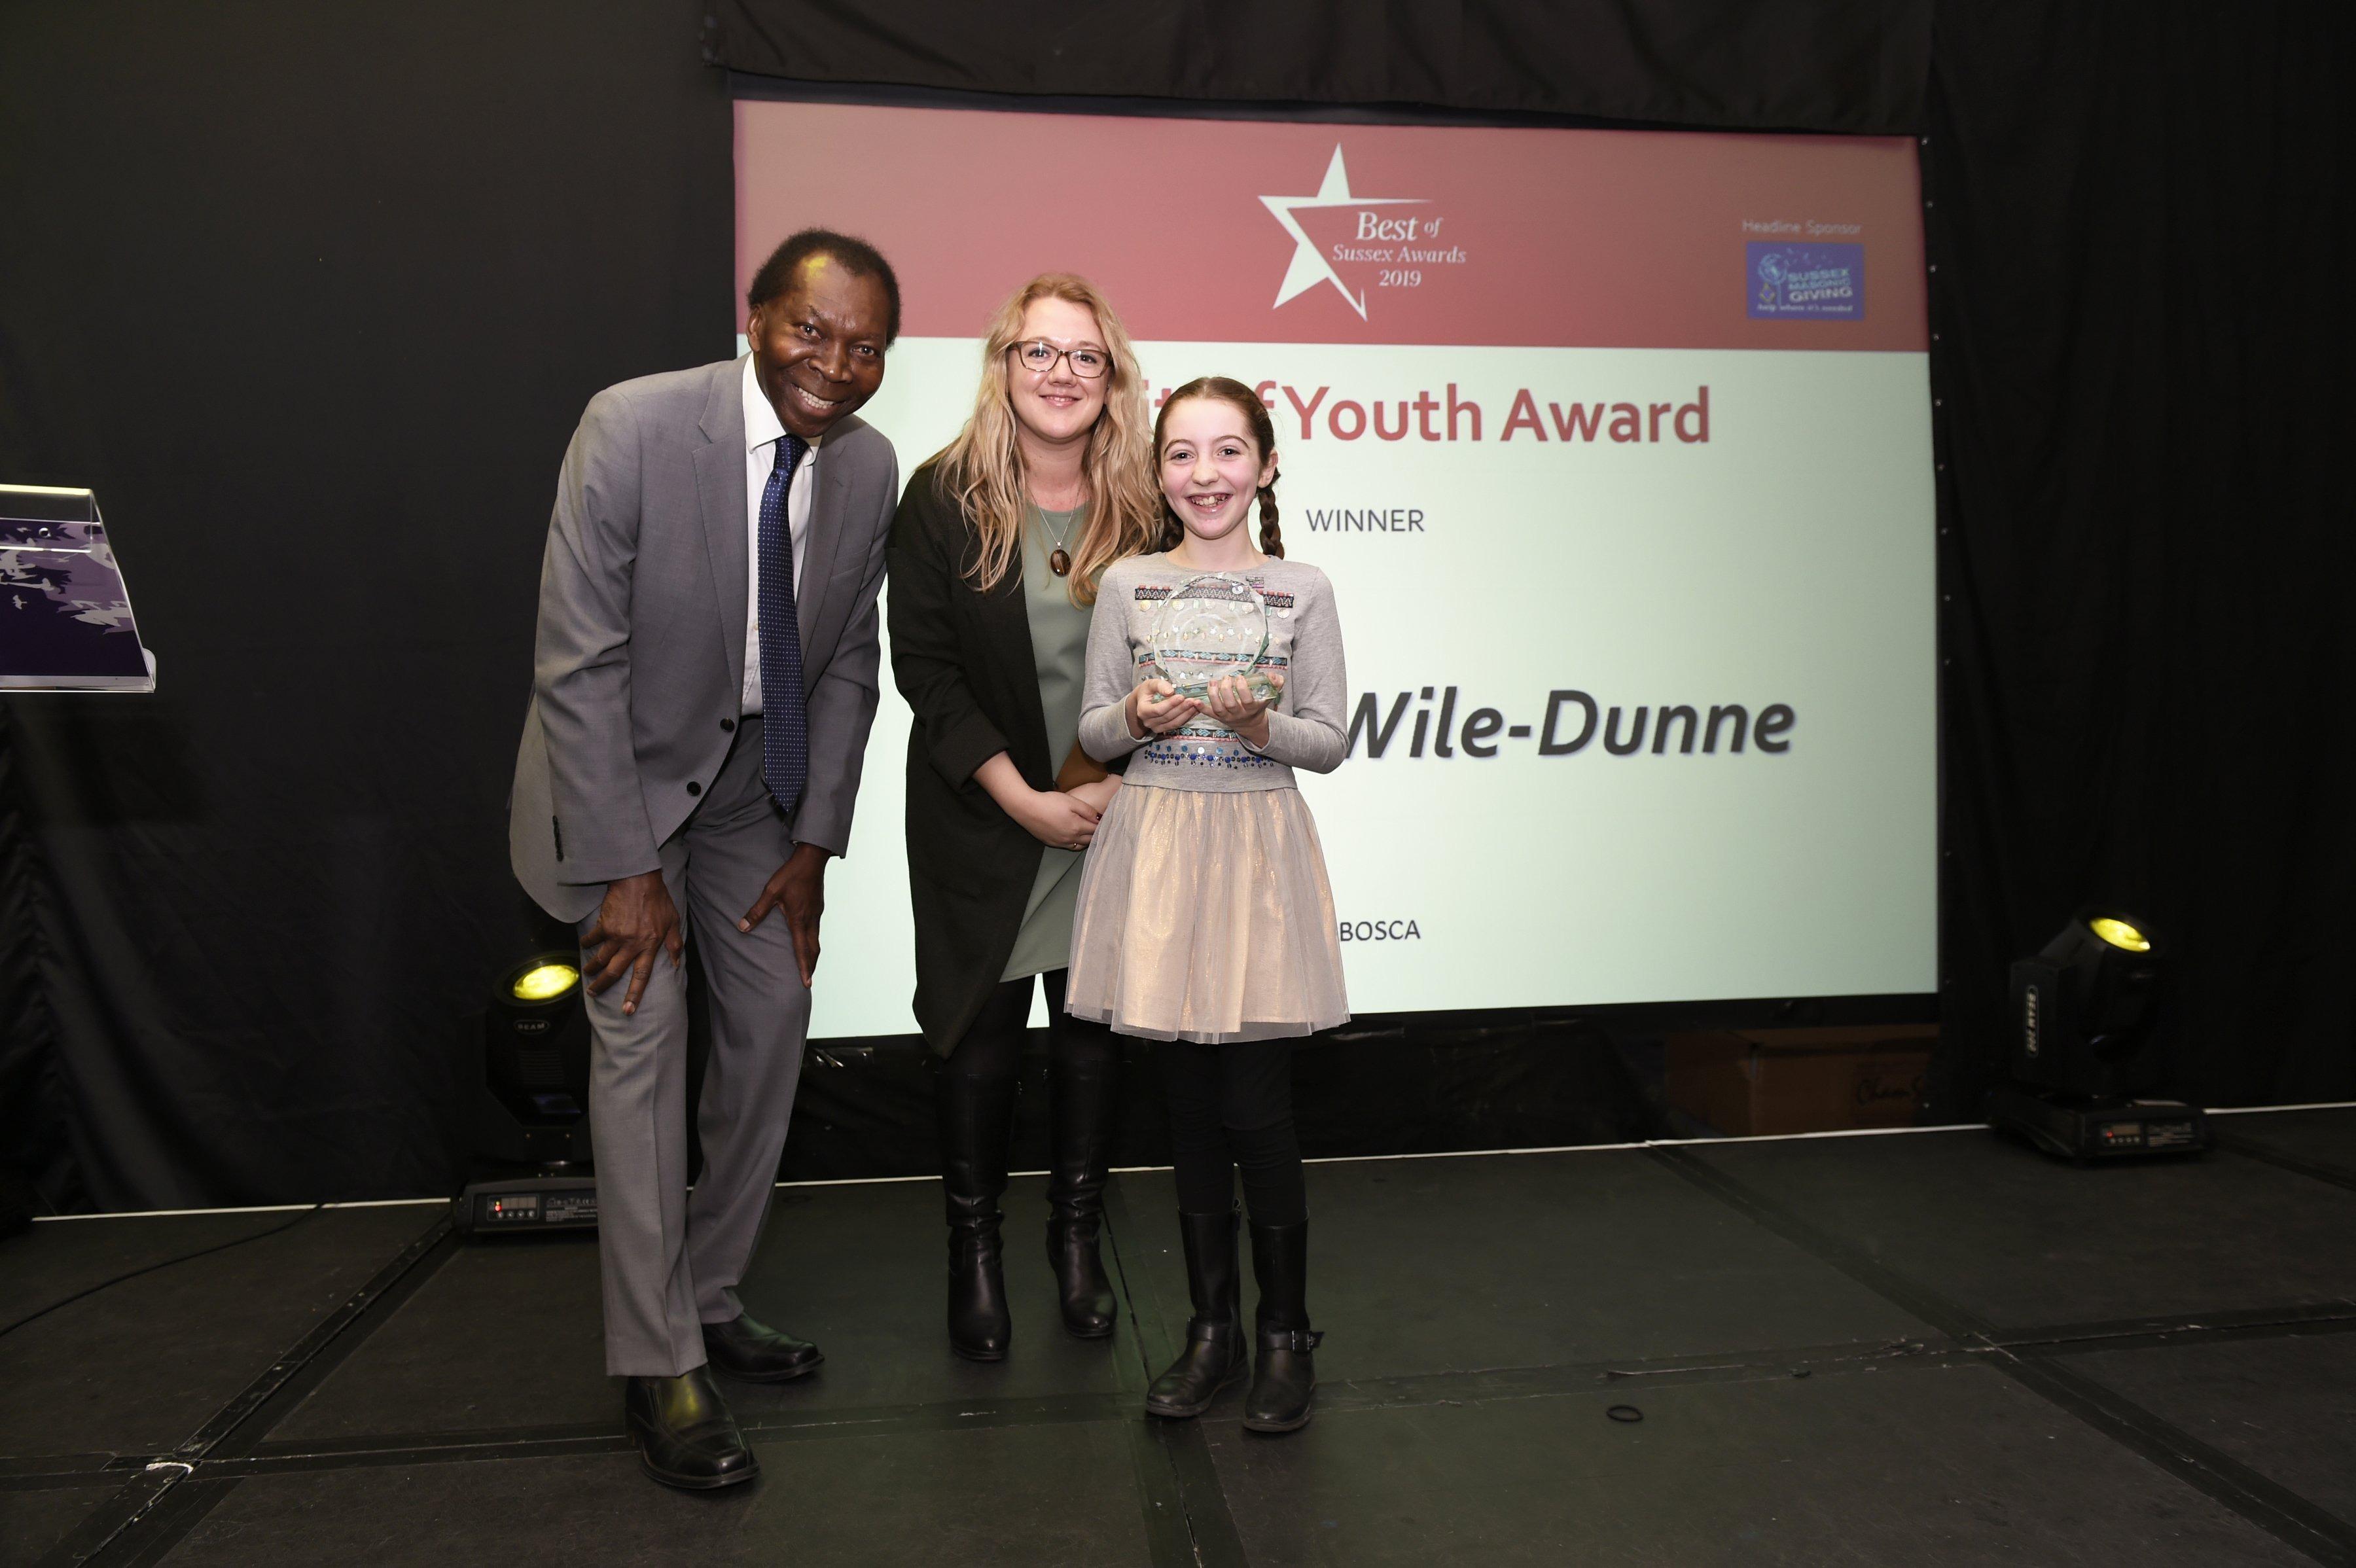 Ellie Mae Wile-Dunne (11) winner of the Sprit of Youth award with Ambrose Harcourt and Bex Bastable of JPI Media. 
Picture: Liz Pearce. 

LP192066